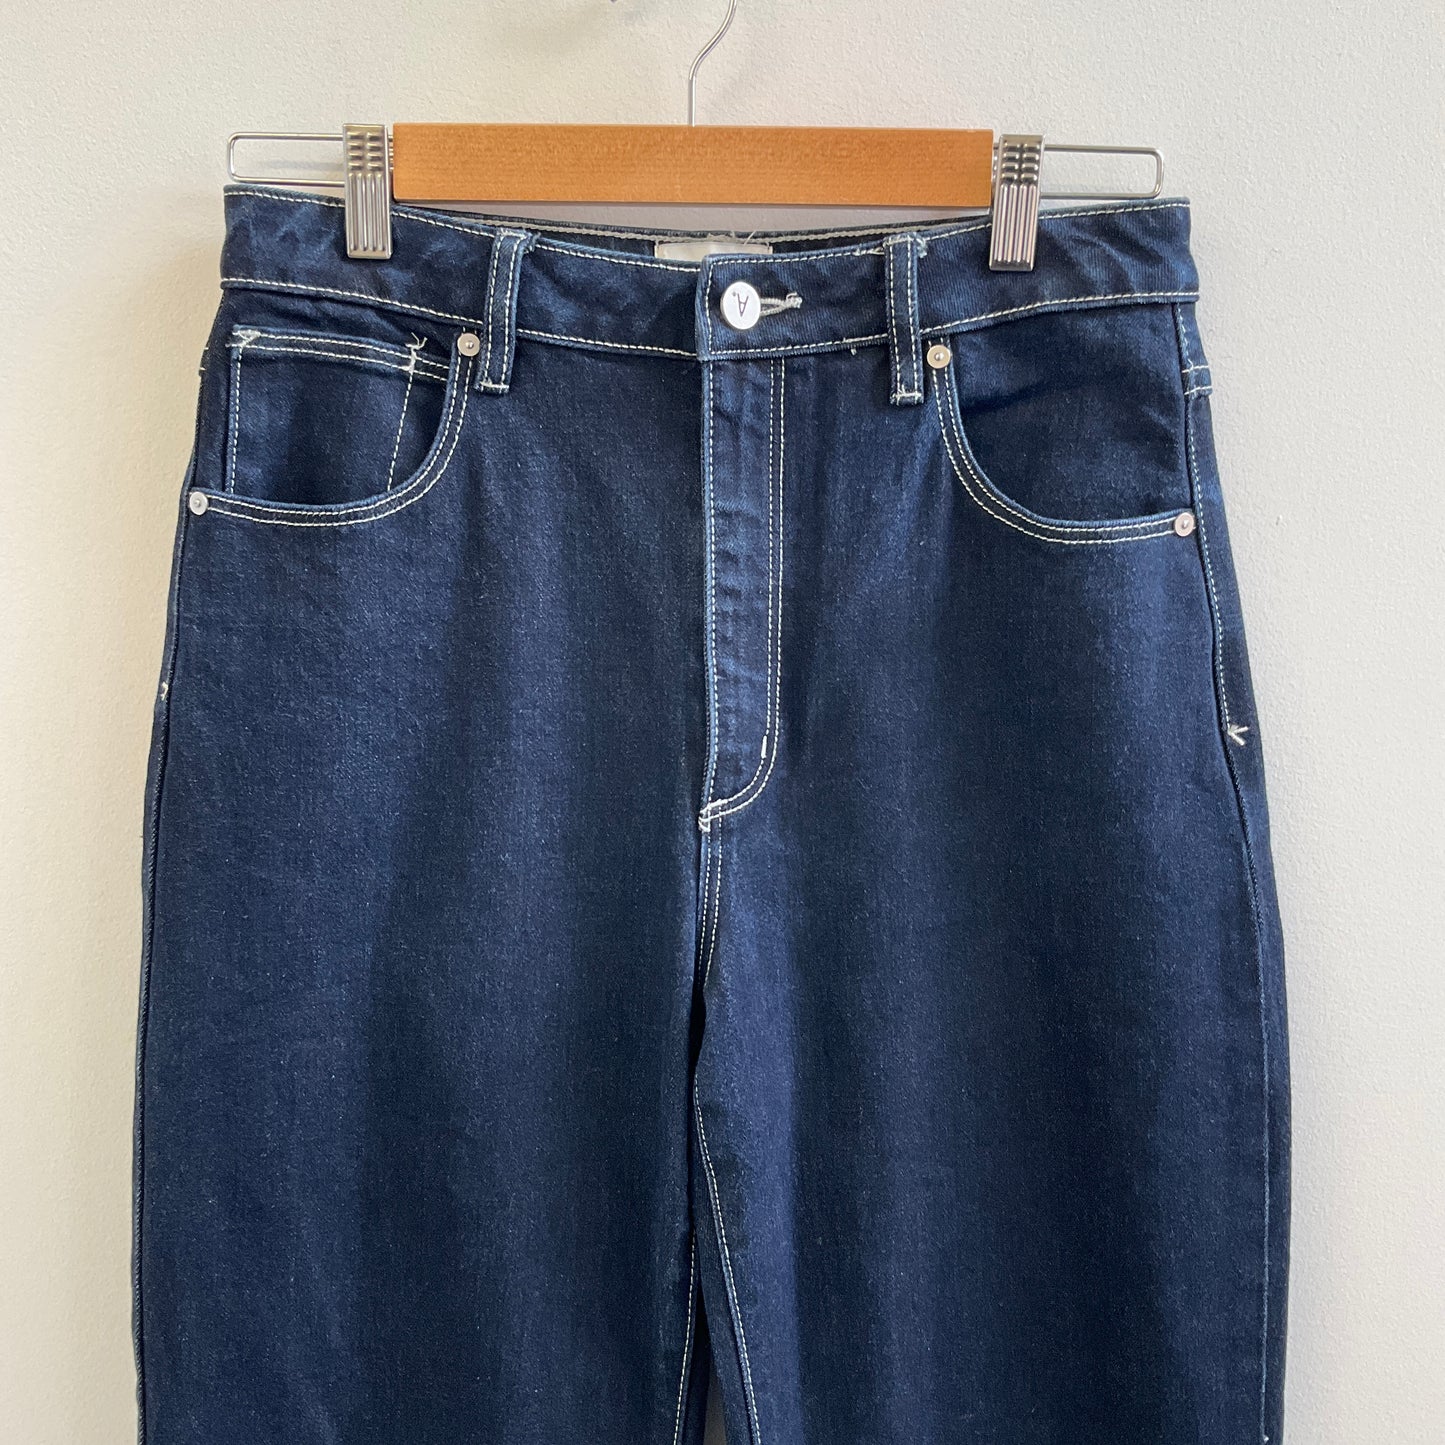 Abrand - Navy Blue Jeans